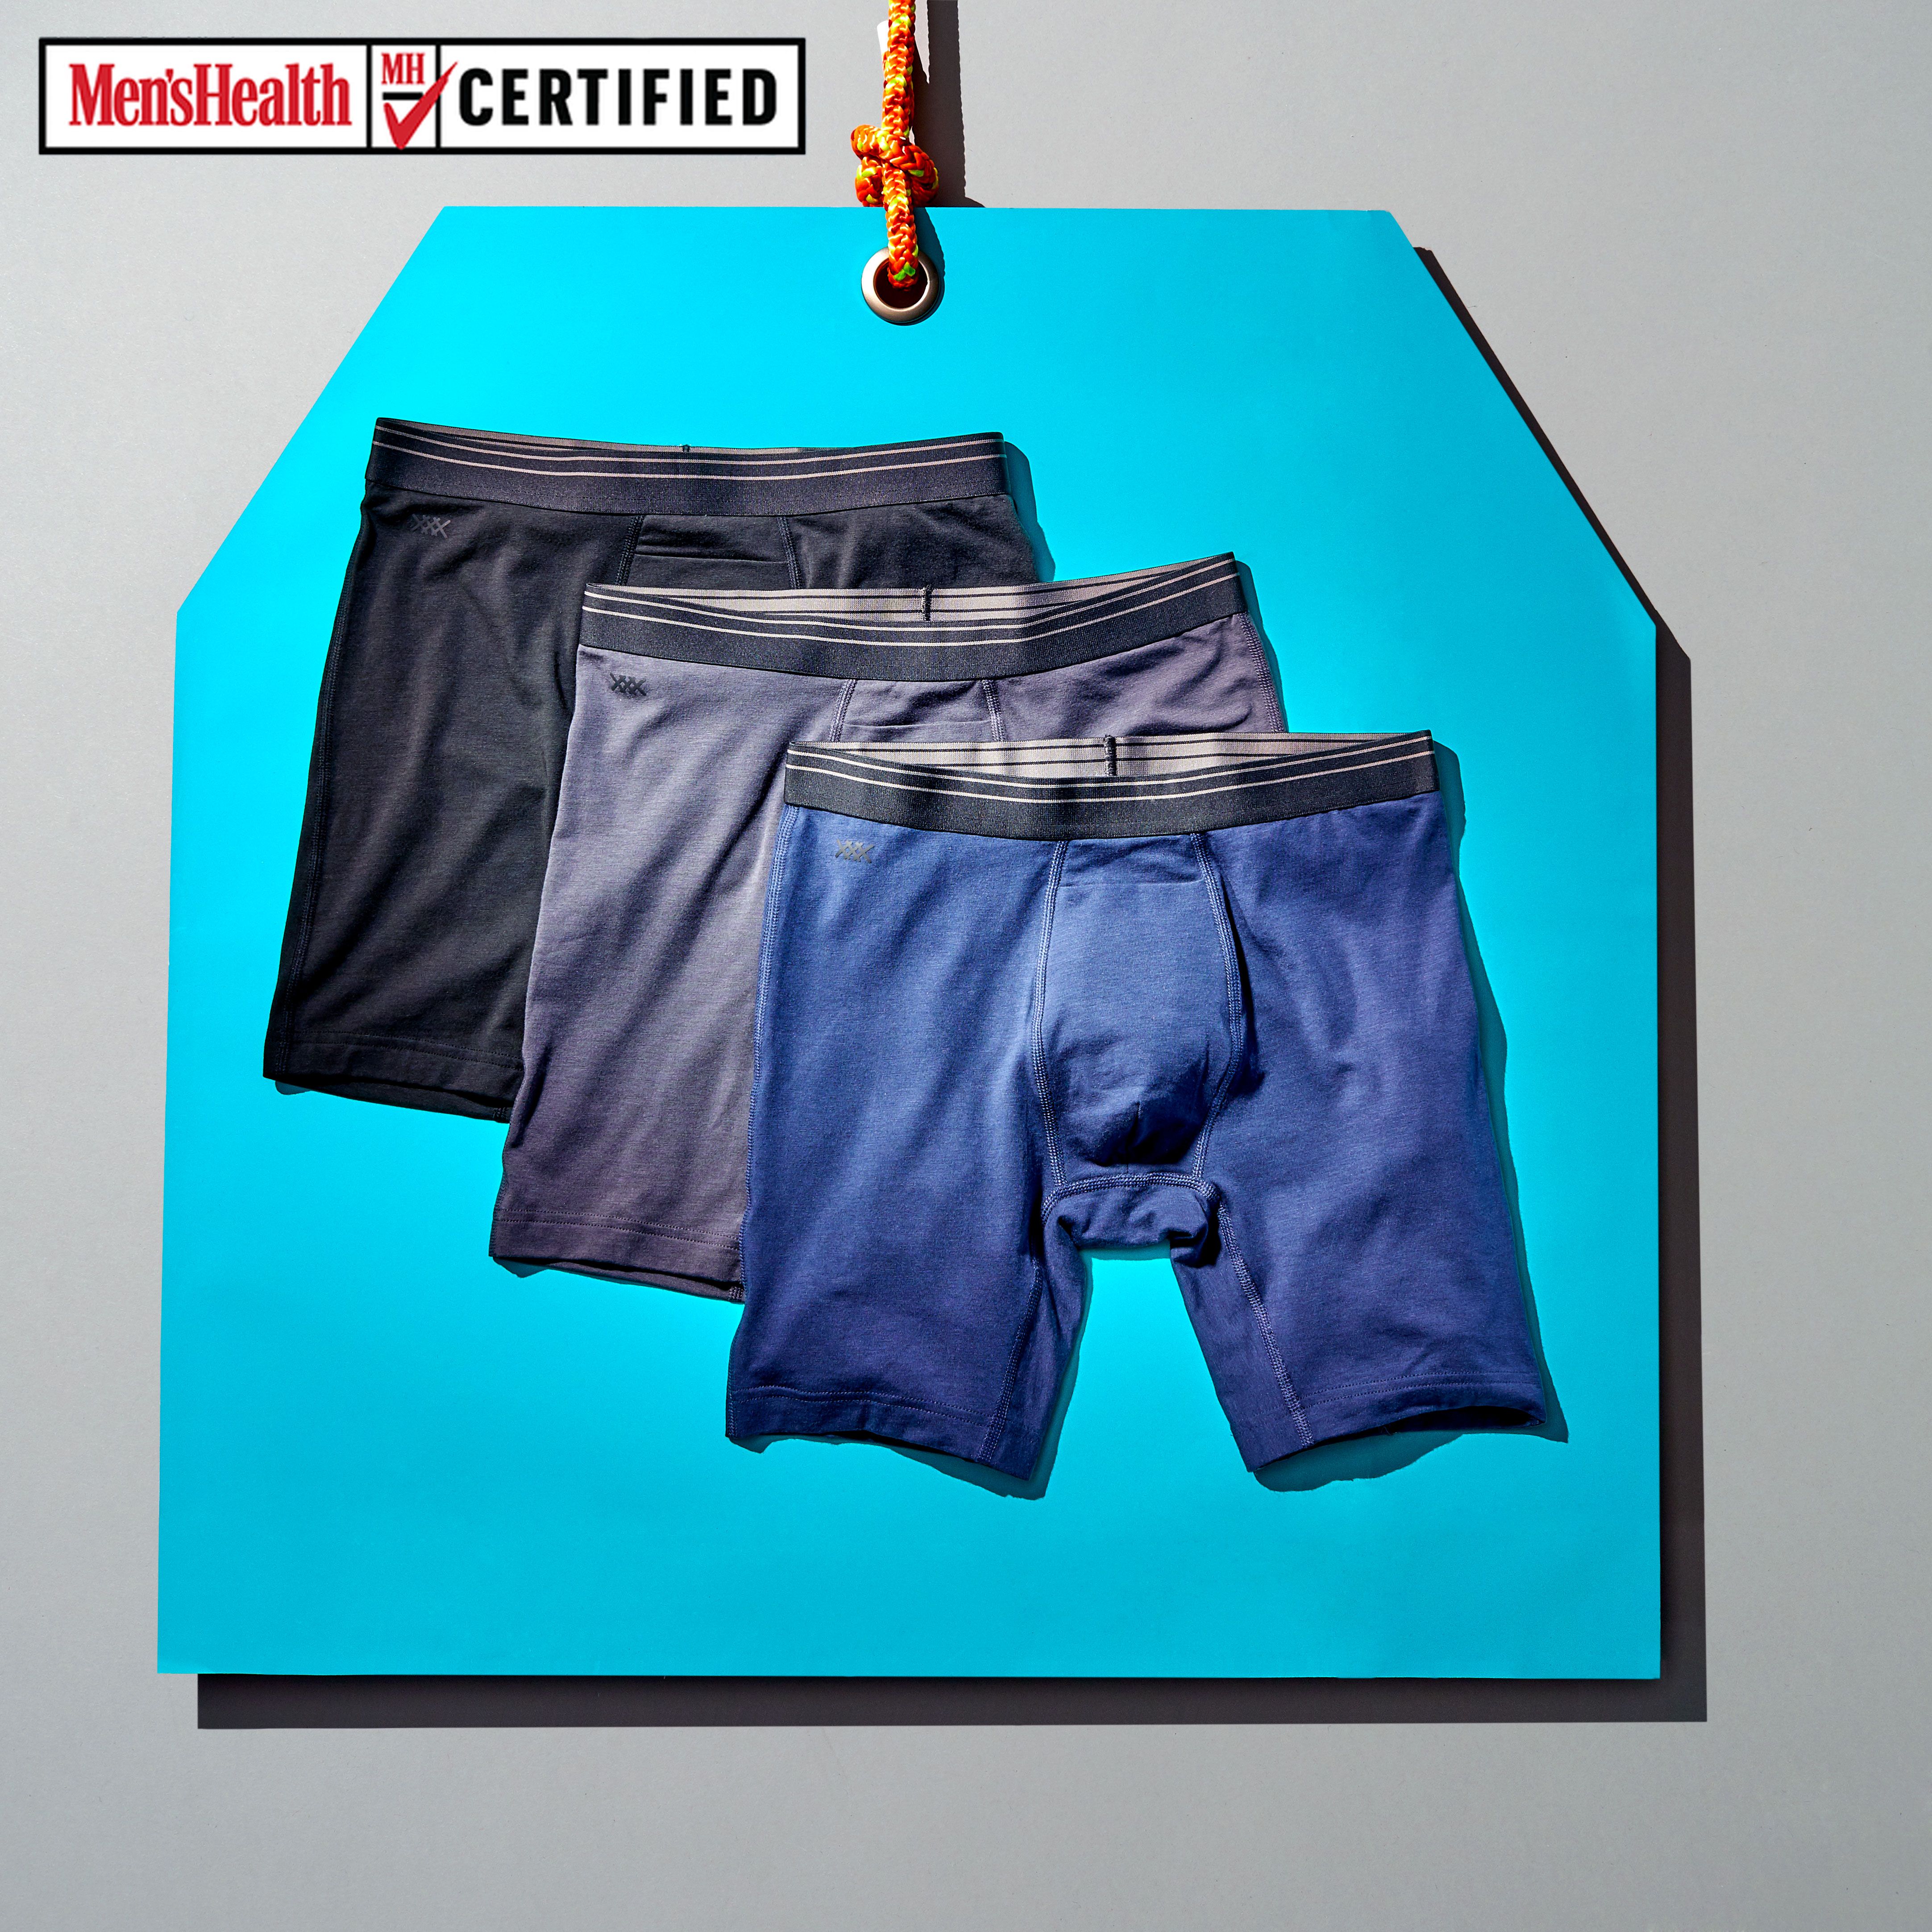 Boxers Vs Briefs: Which One Is Better For Men's Health?